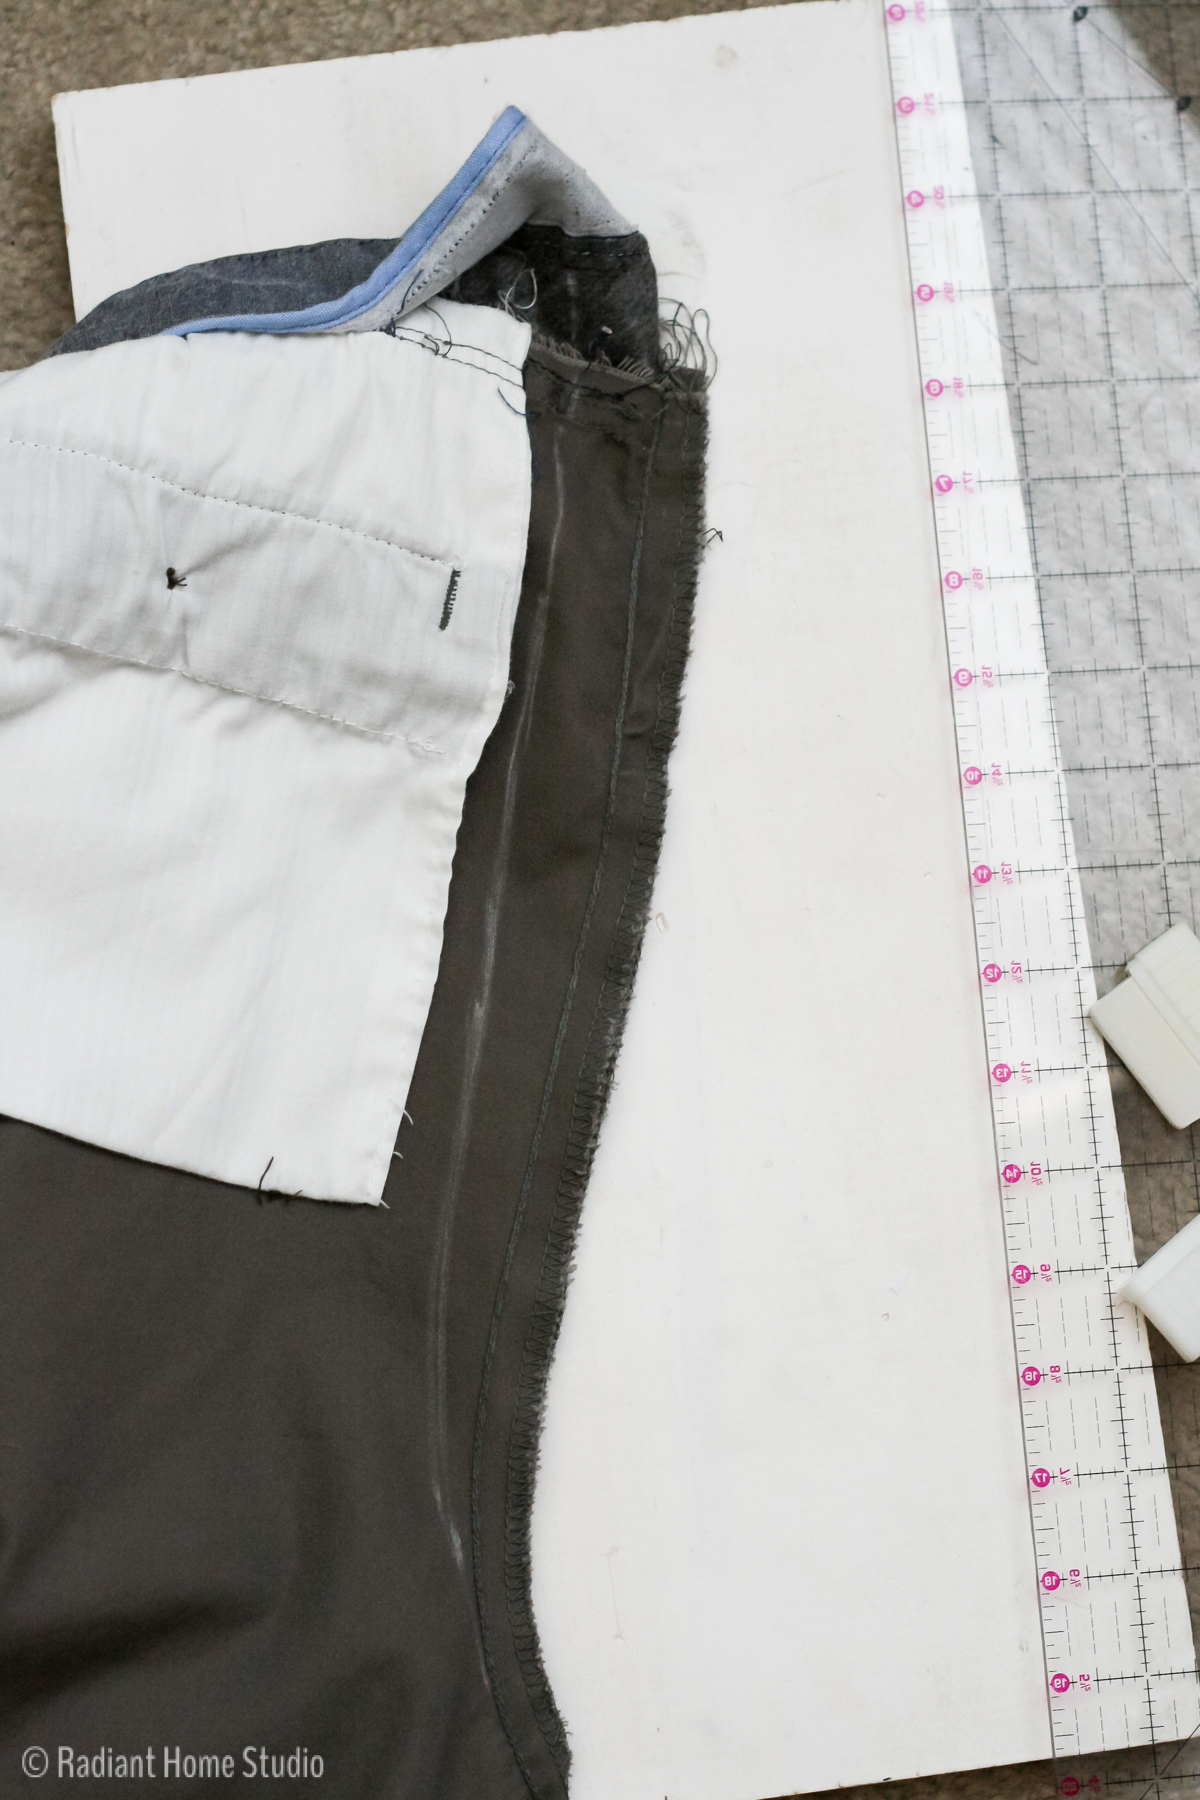 How to Alter the Waist on Men's Pants | Radiant Home Studio